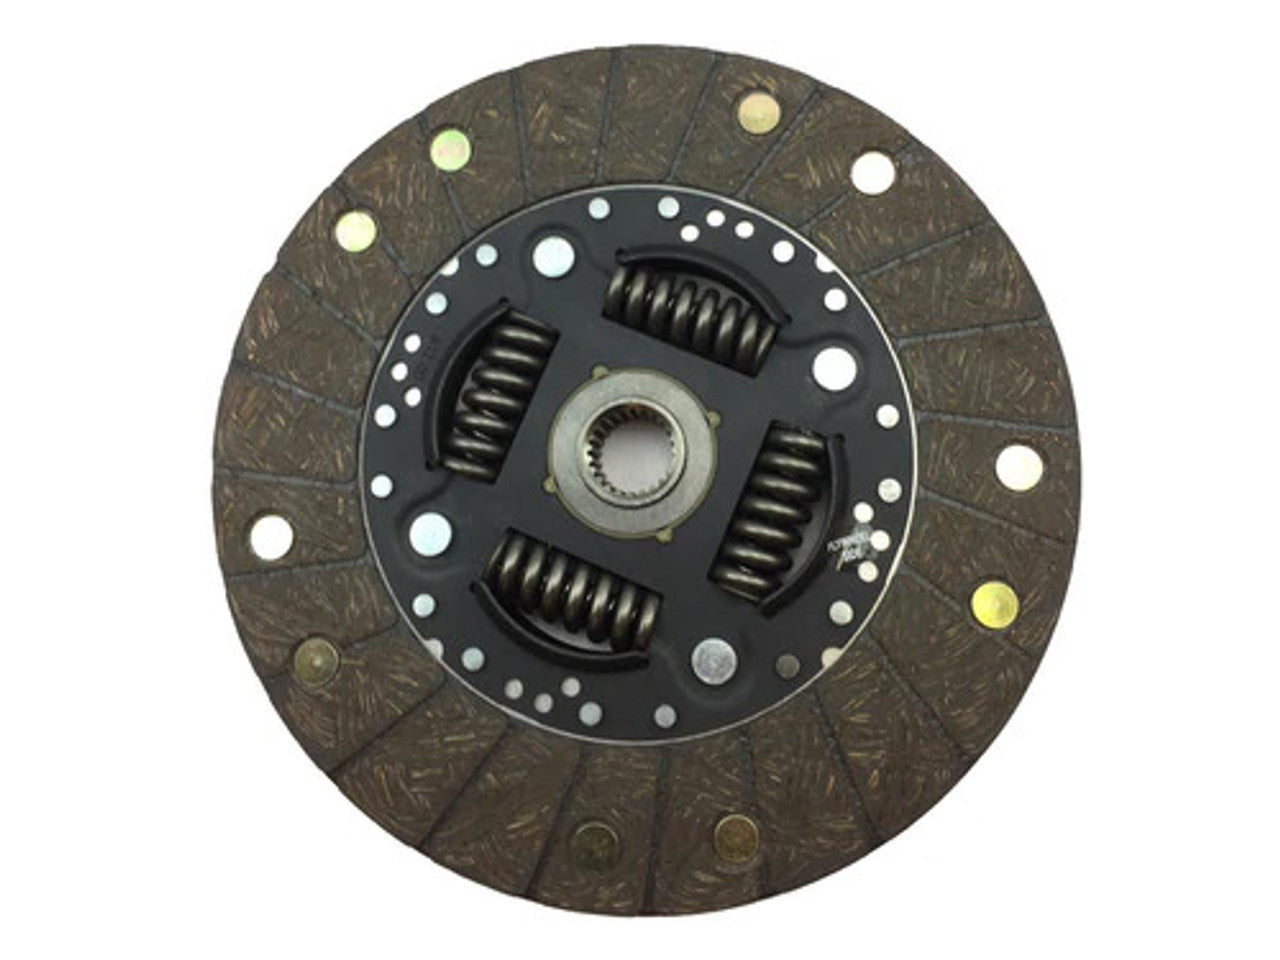 RTS Performance Clutch – Twin-Friction Clutch Kit for Audi S1 2.0TFSI